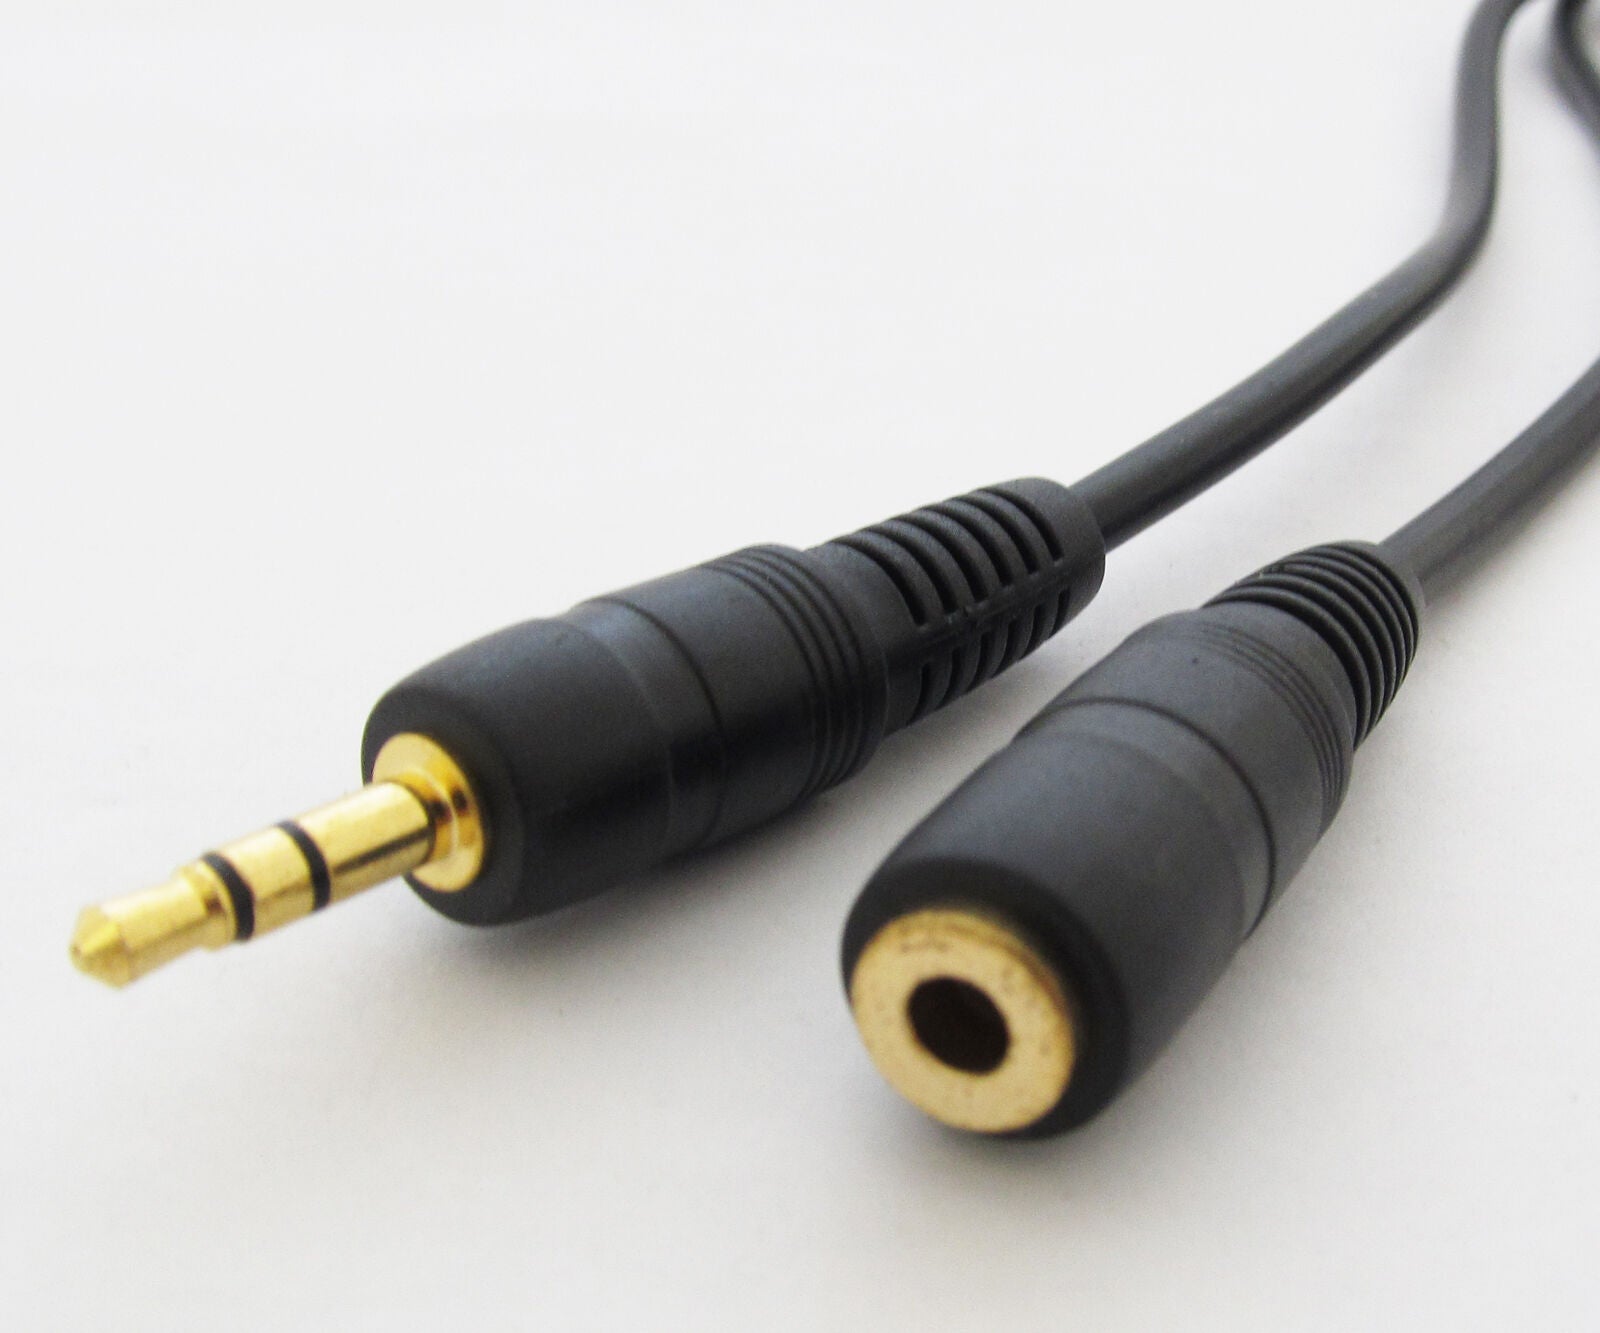 1pc 1.8 Meter 6FT High Quality Audio Cable 3.5 Stereo Male to Jack Female